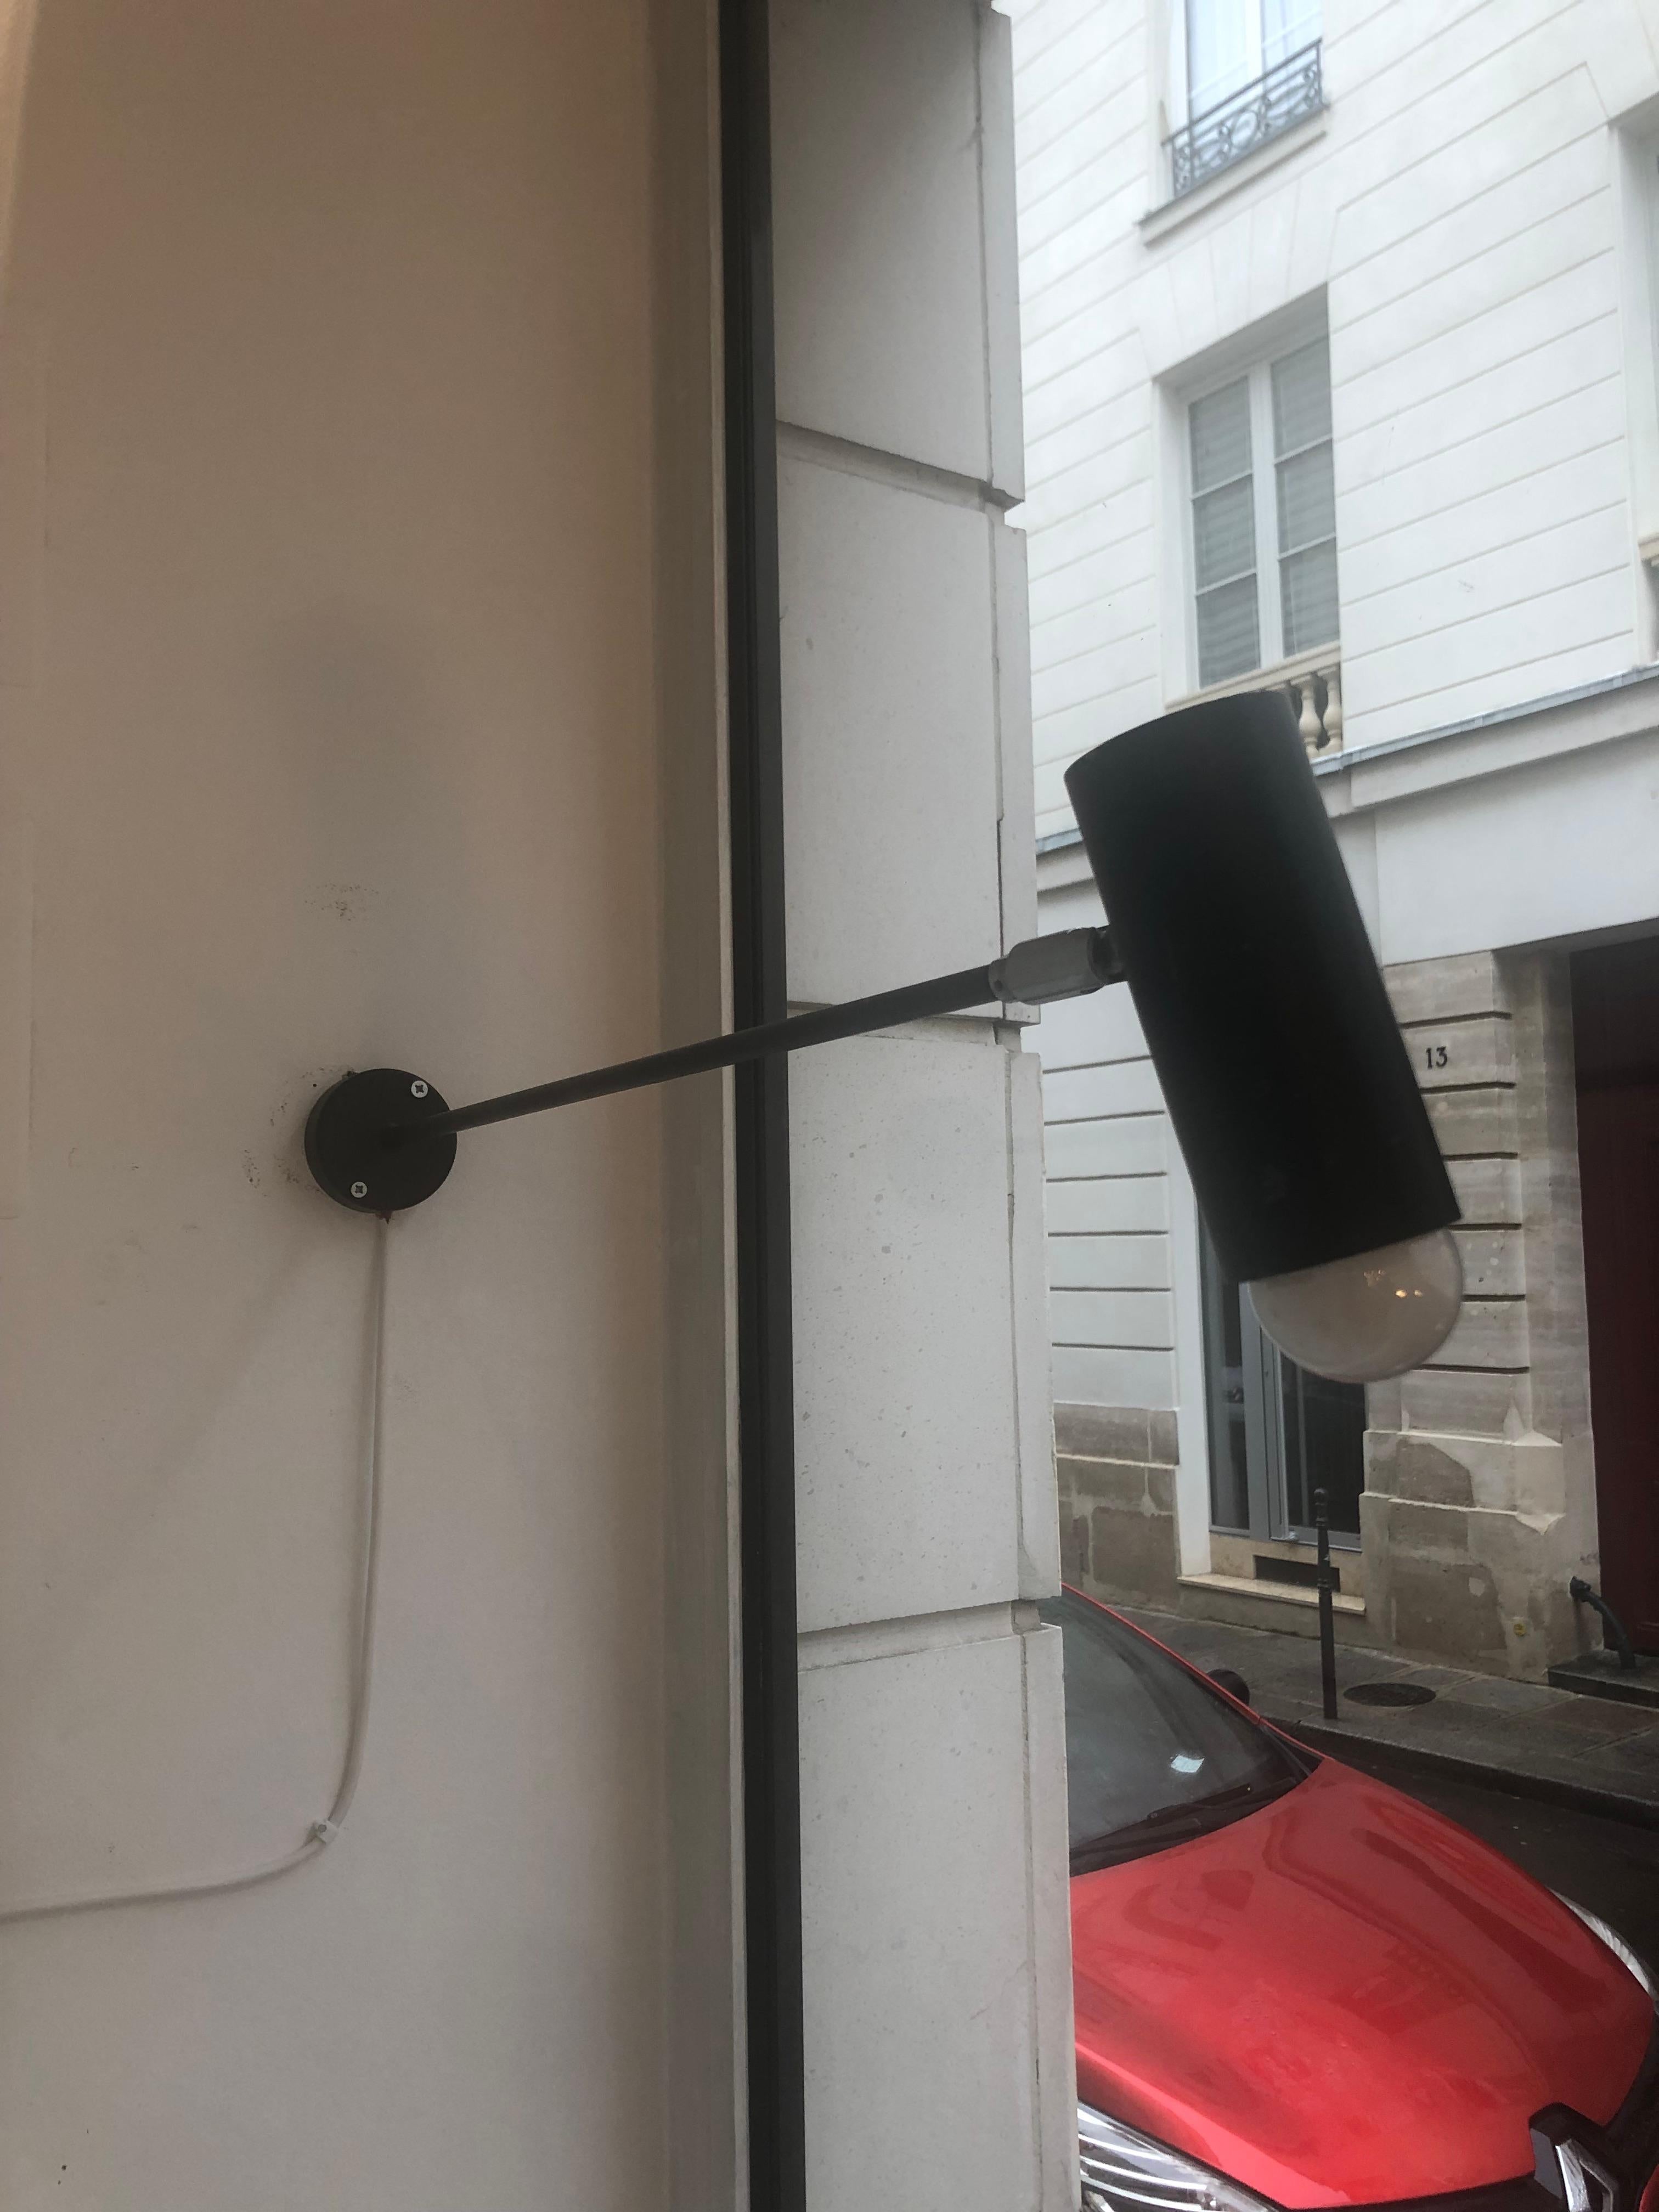 Wall lamp in the style of Jean-René Caillette. It is composed of a round support placed directly on the wall extended by a stem ending in a rotating cylinder playing the role of light source. The whole is in black metal.
Bulb reference: E27
In